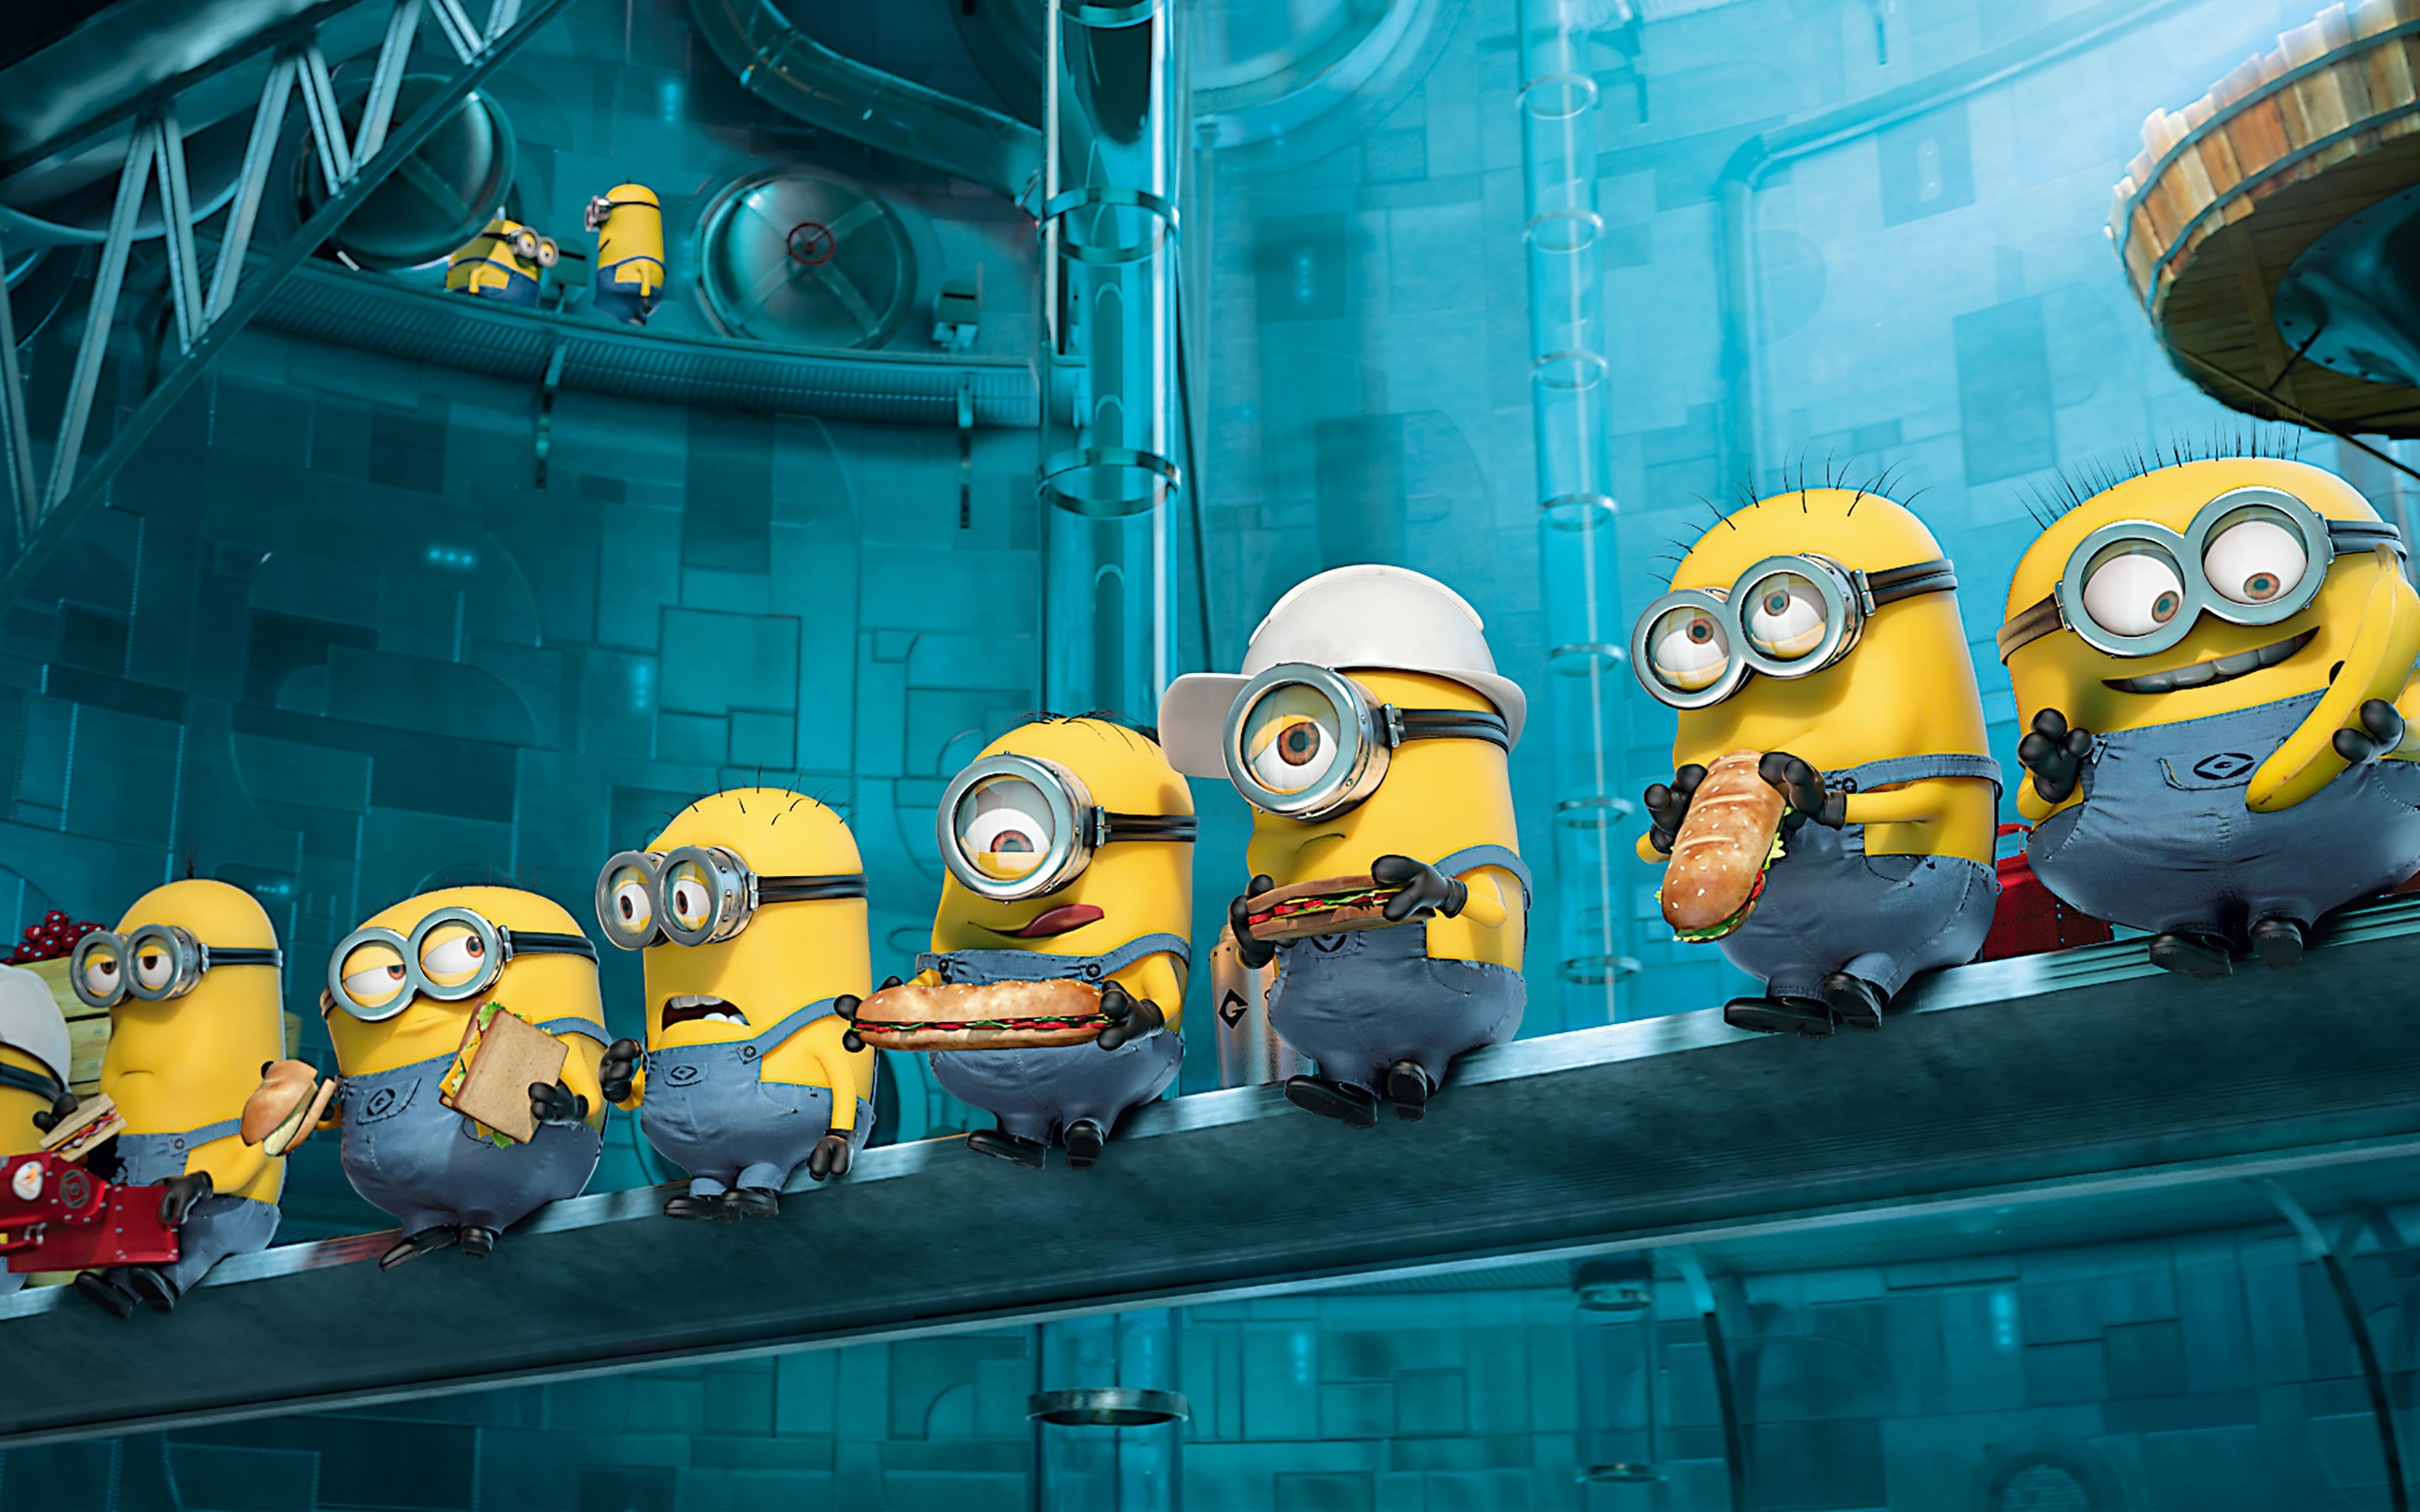 2880x1800 Minions Quotes Wallpaper Hd For Android : Collection of 25 really cute  minions hd wallpapers